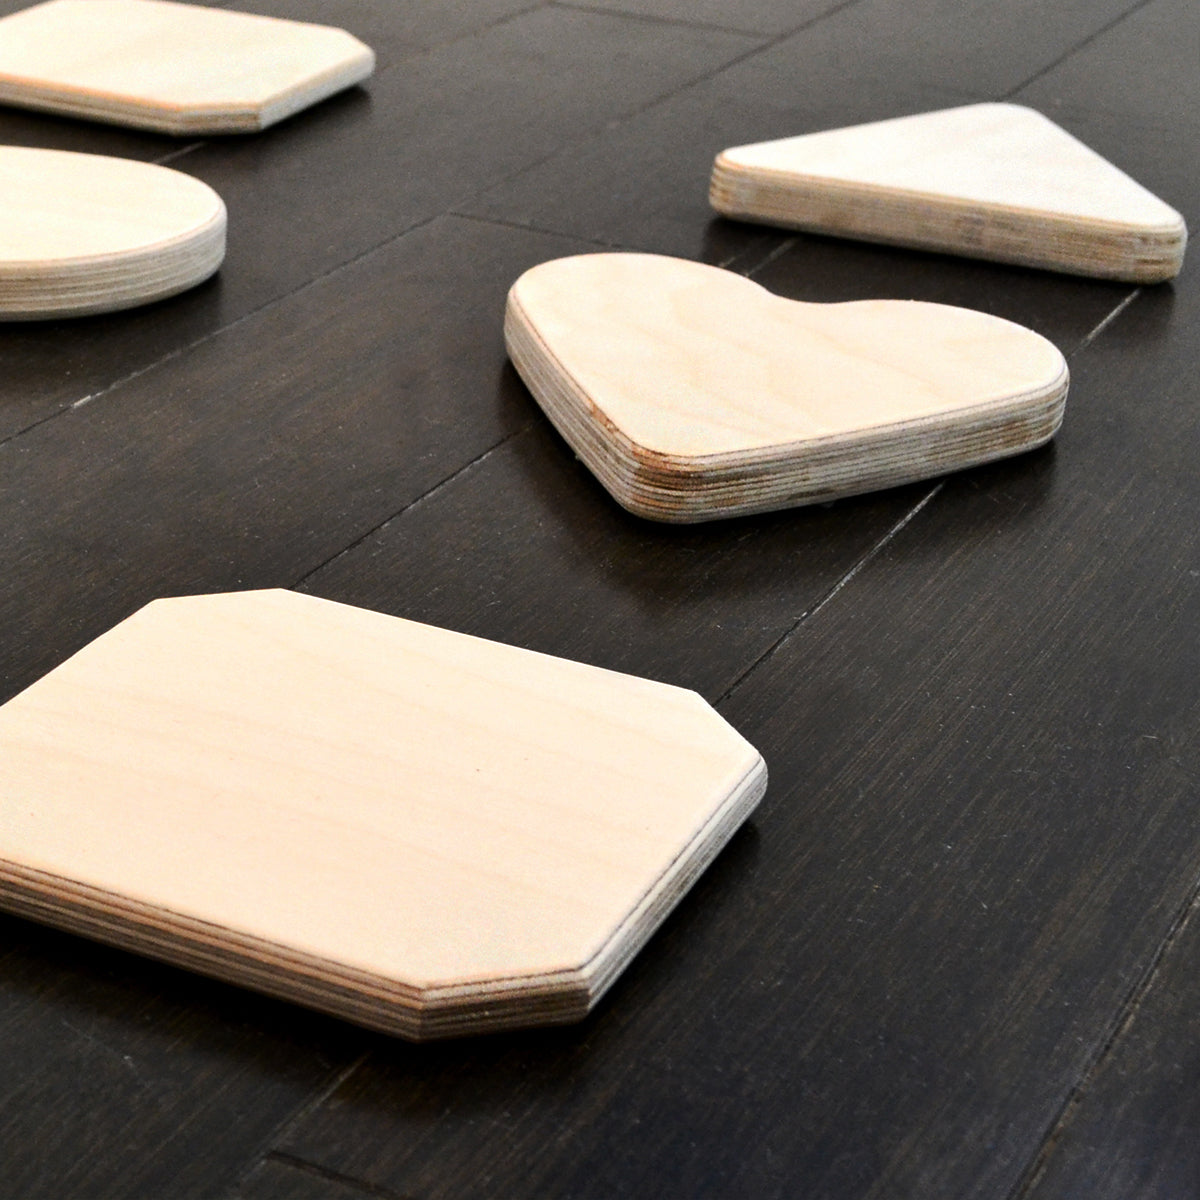 Specialty Stepping Stones - The Wooden Studio